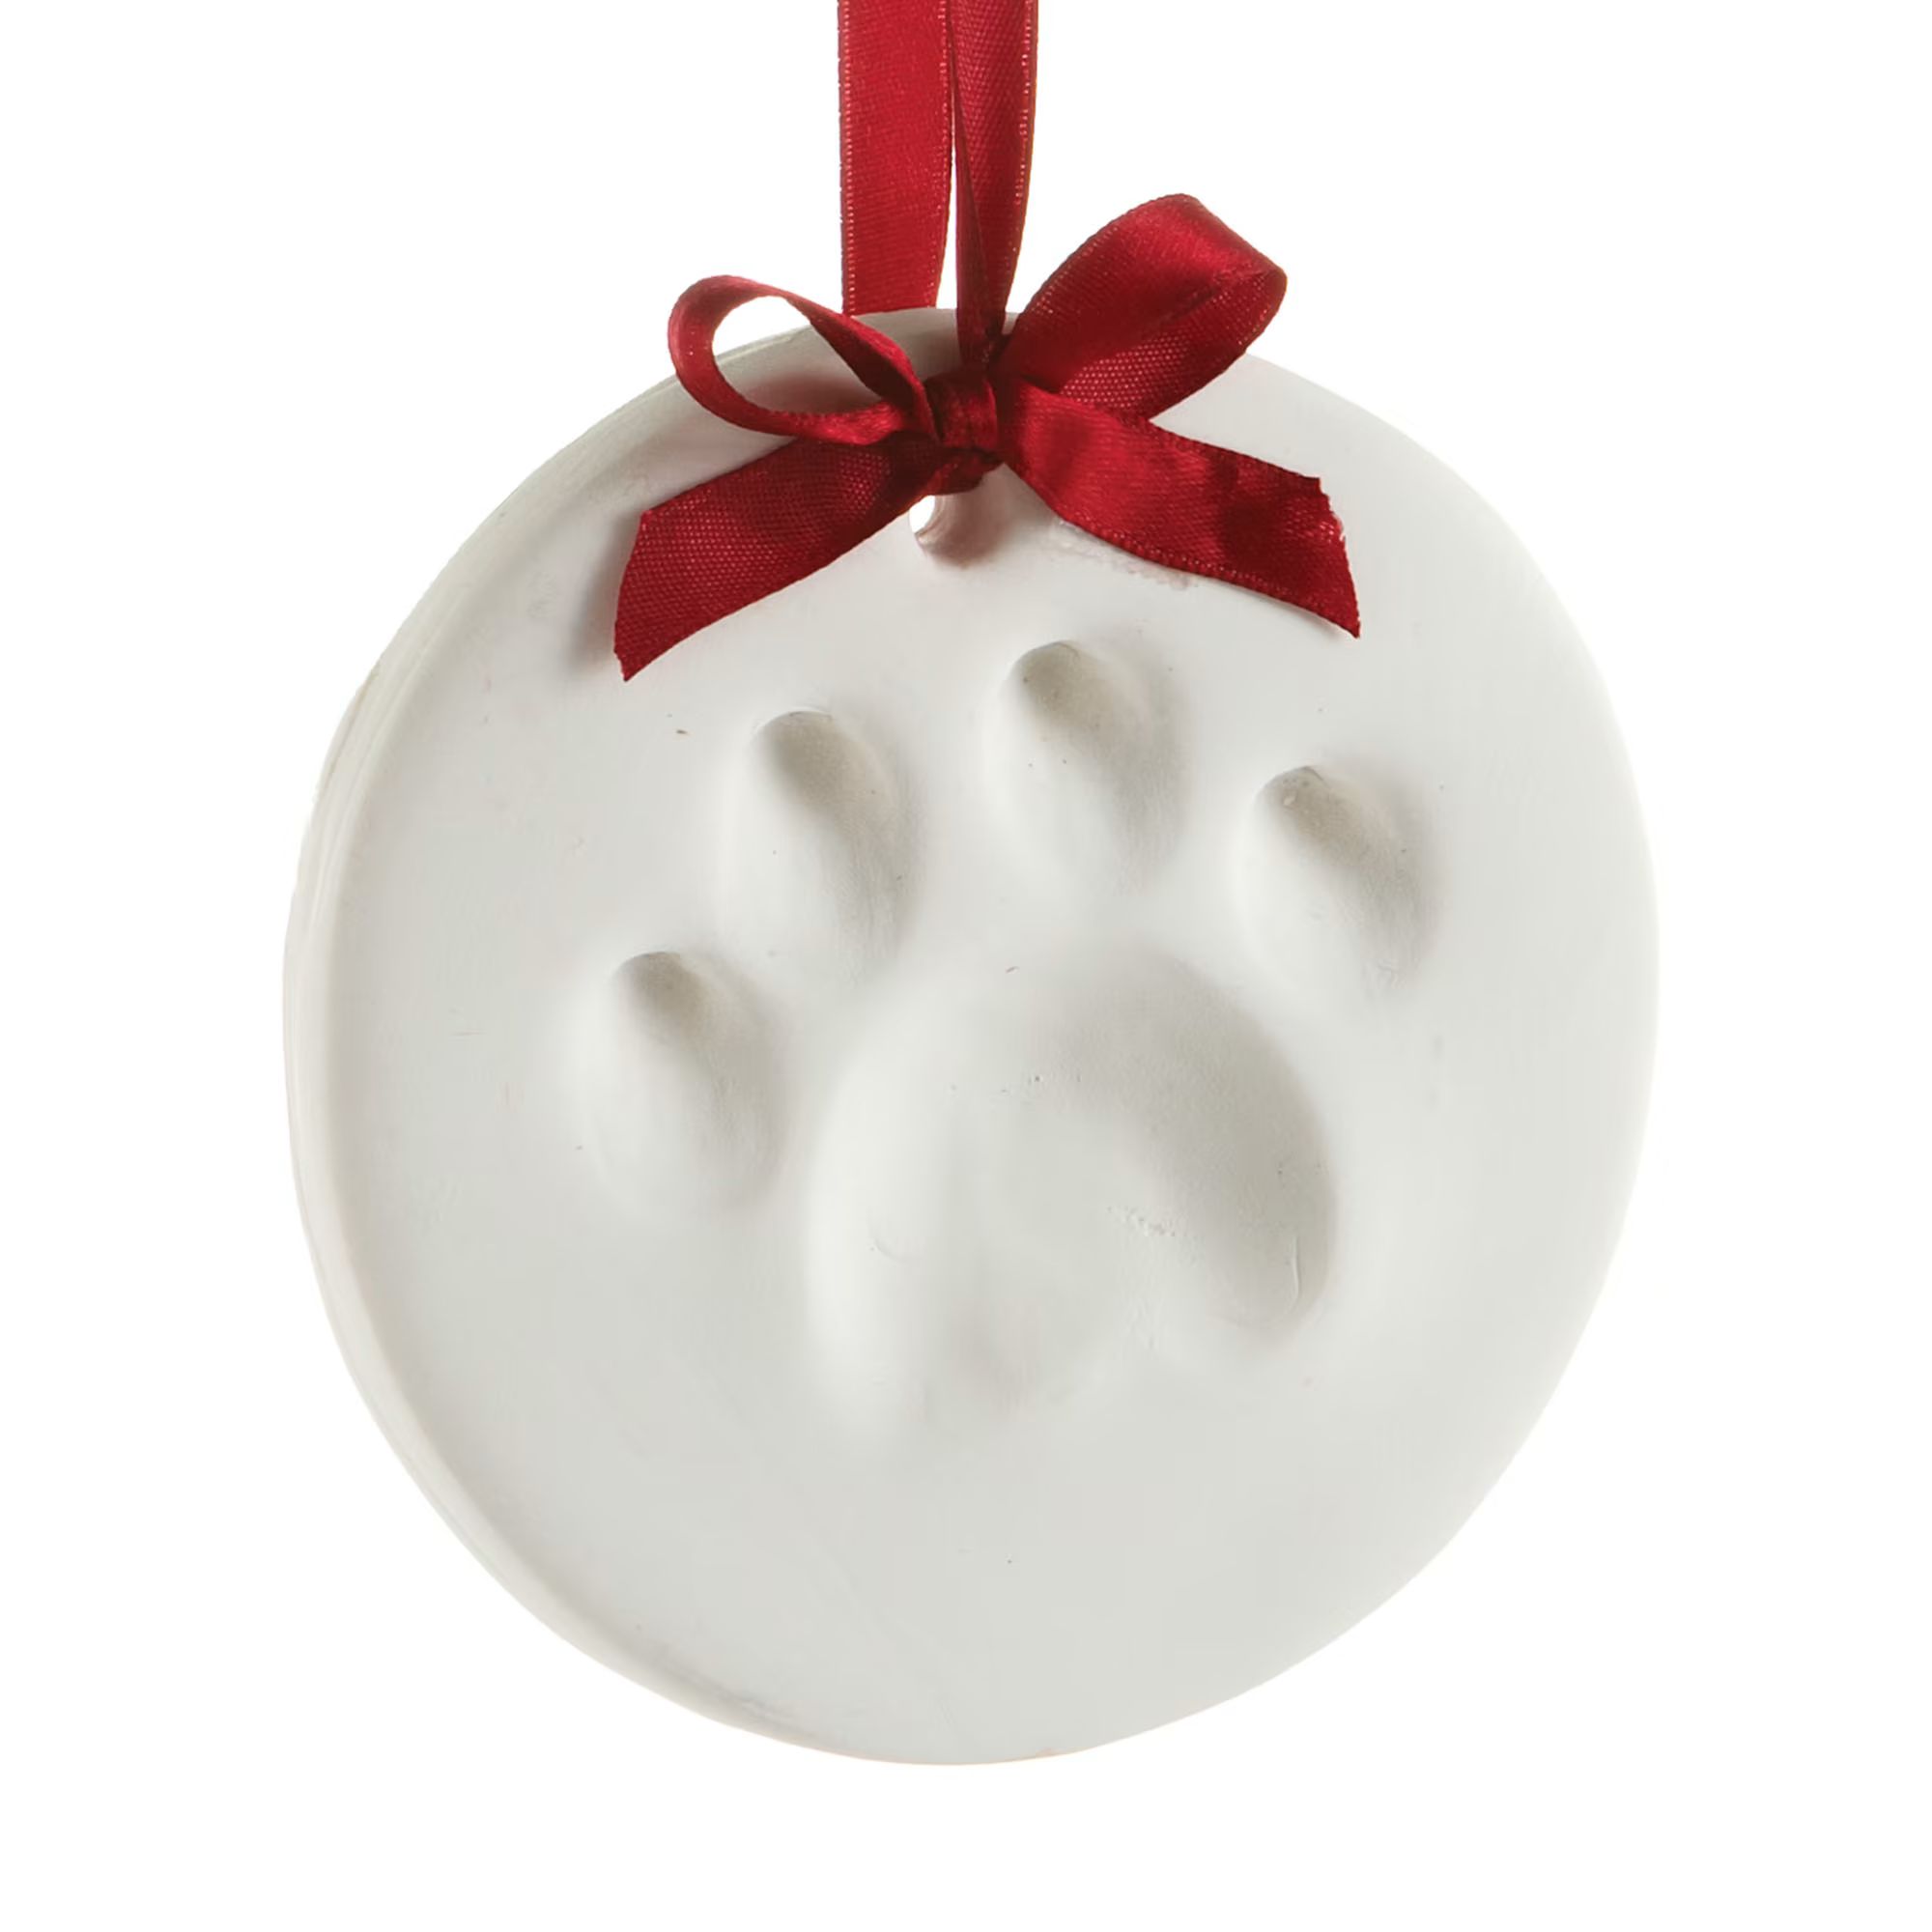 Pearhead Pawprints Holiday Ornament Impression Kit For Dogs or Cats | Petco